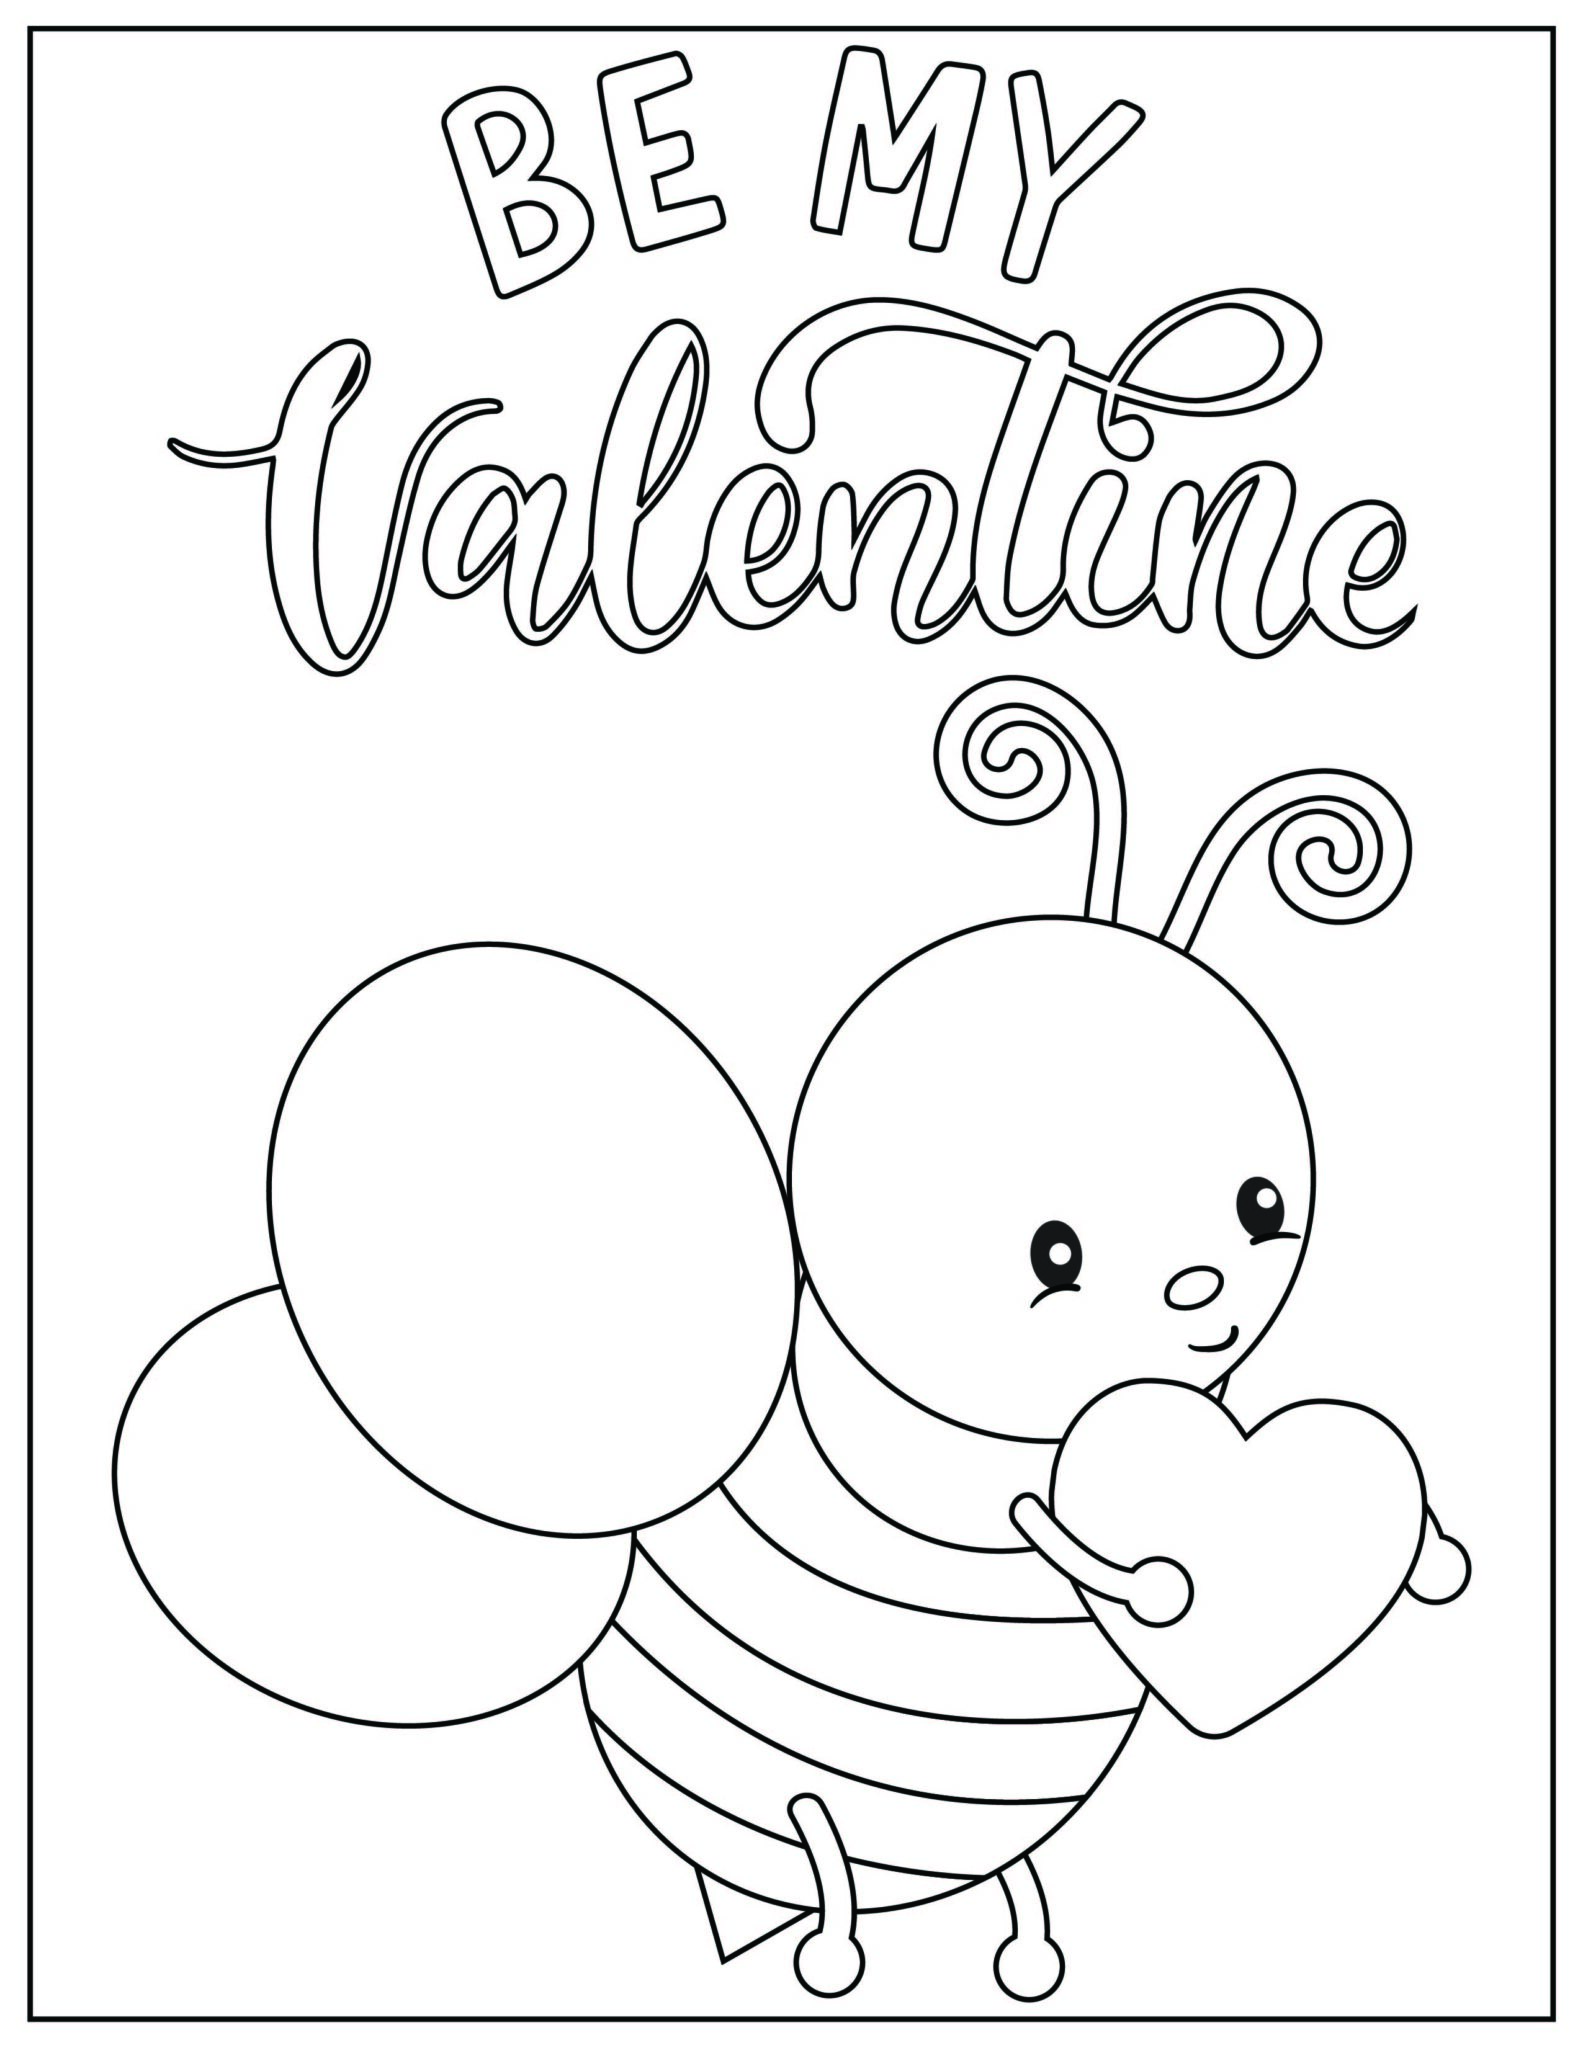 Cute Valentine's Coloring Pages - Mom Does Reviews